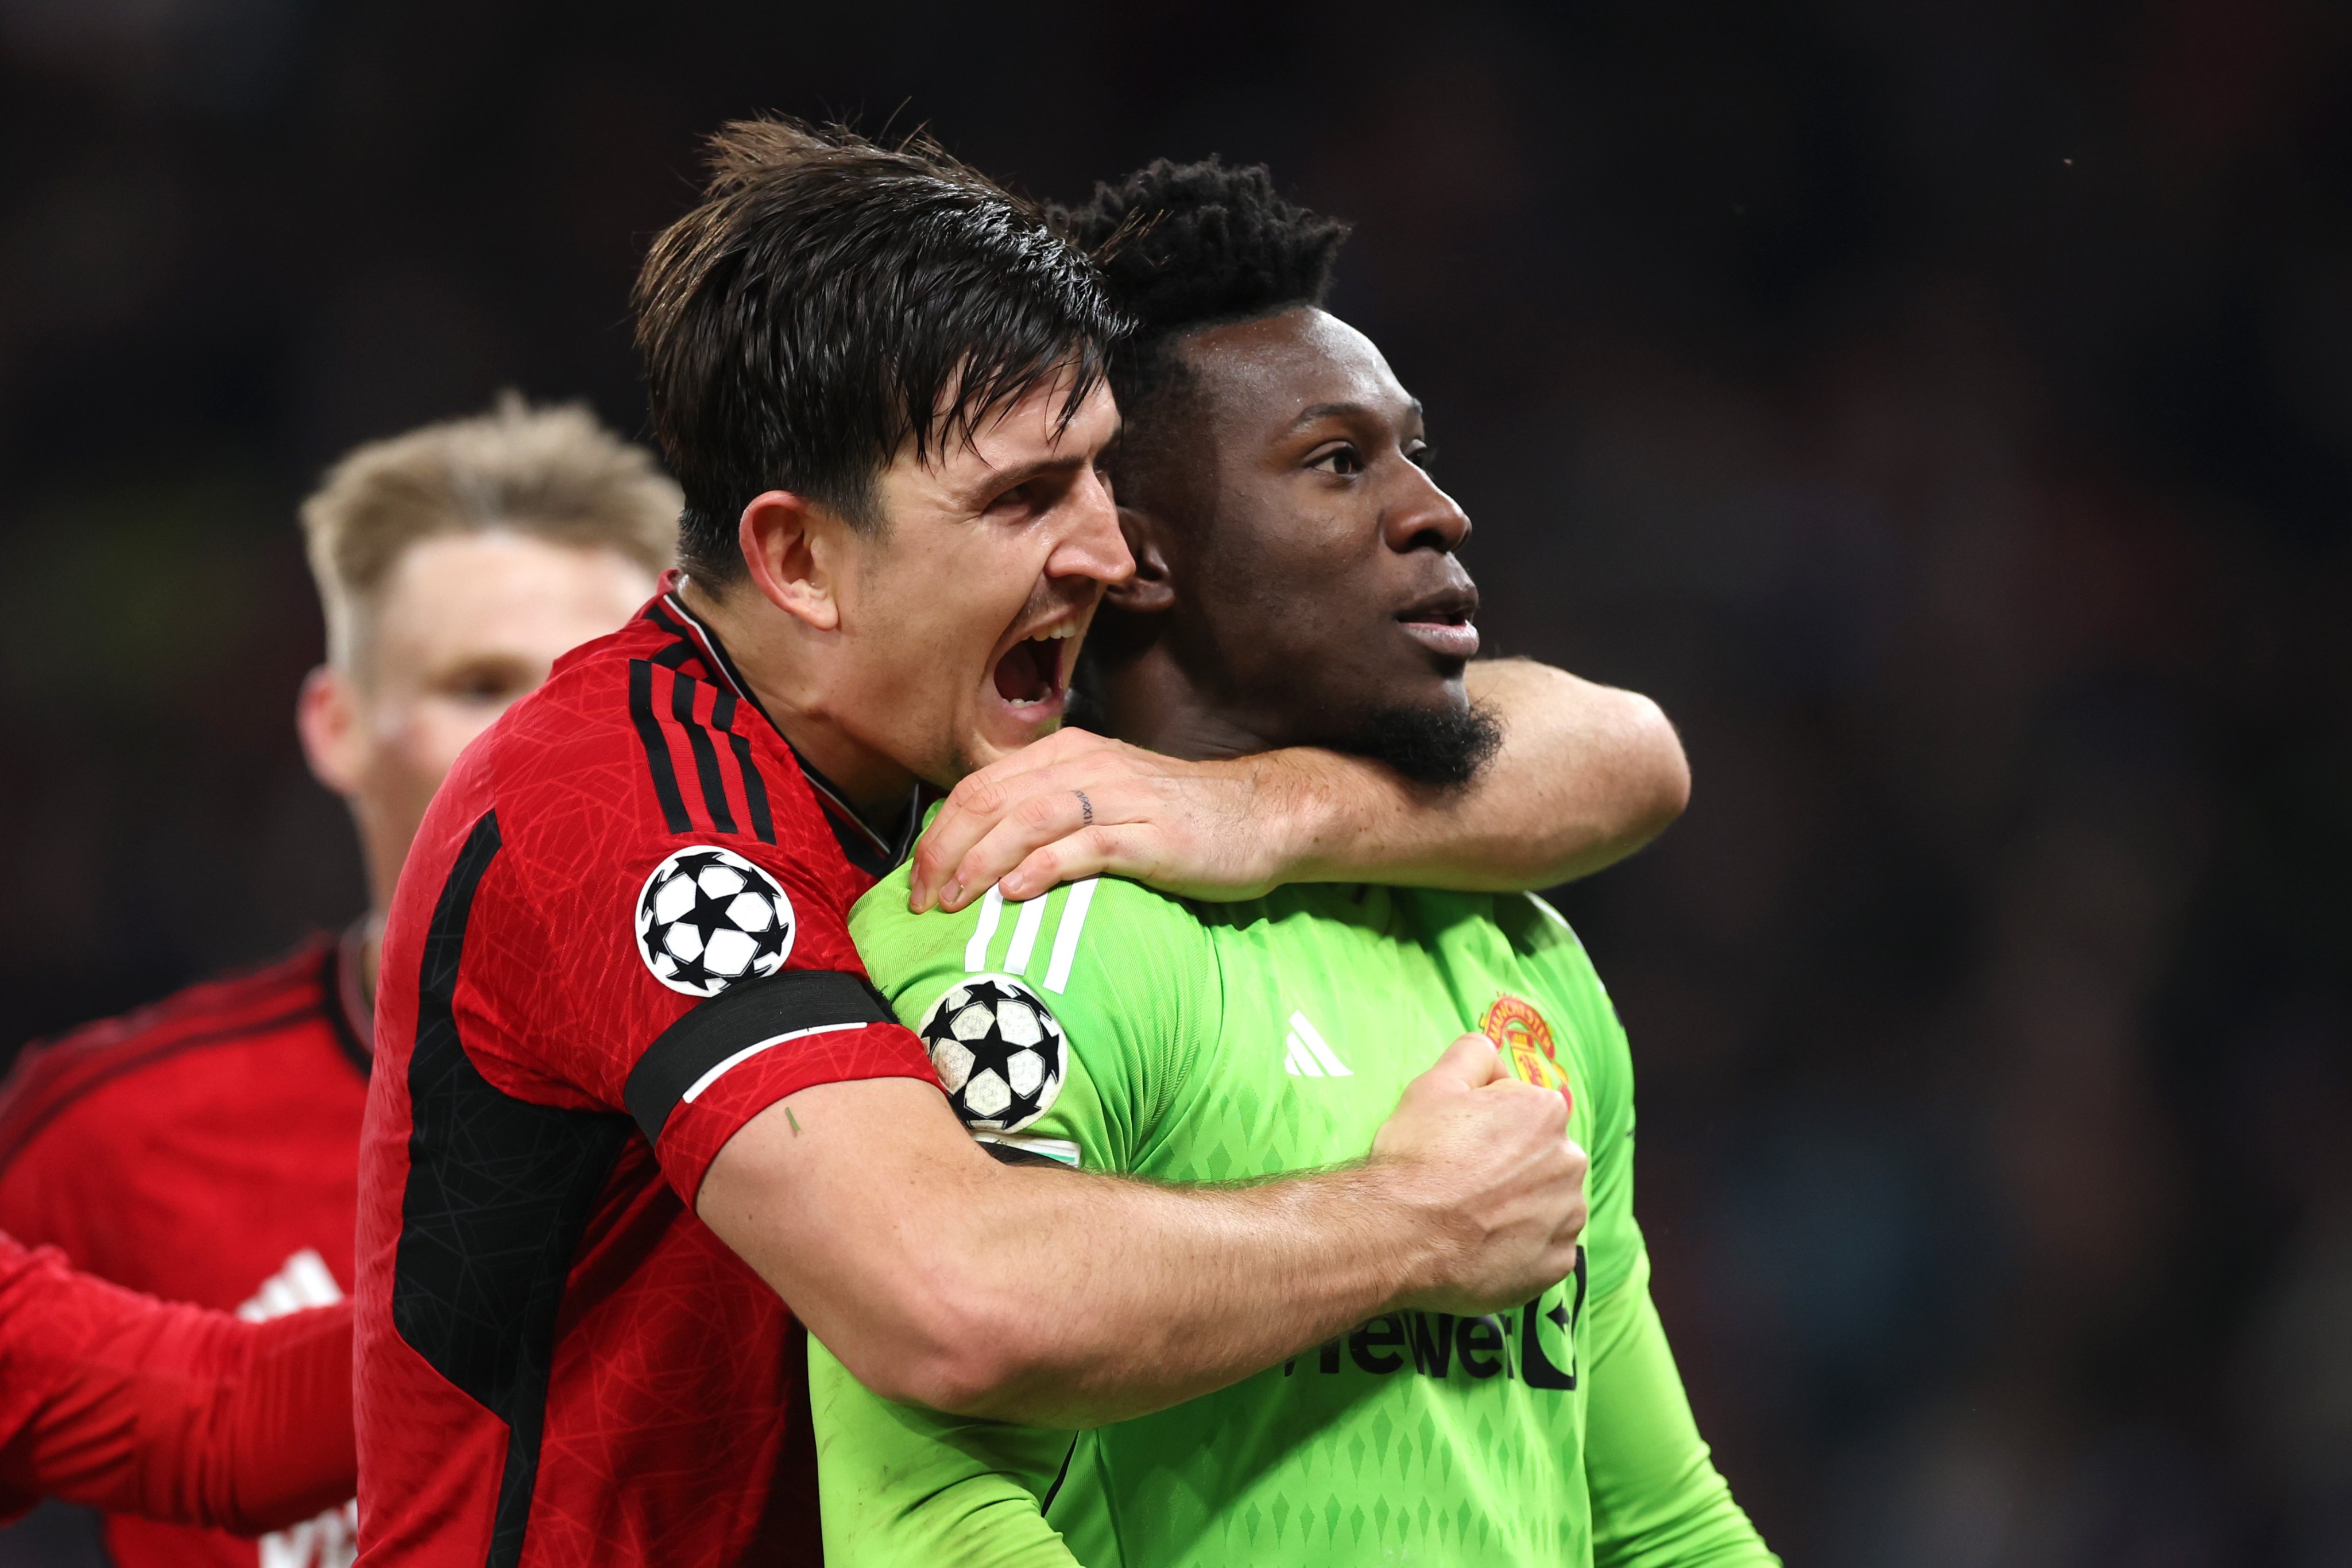 Harry Maguire and Andrey Onana get the last laugh as Manchester United keeps their Champions League hopes alive